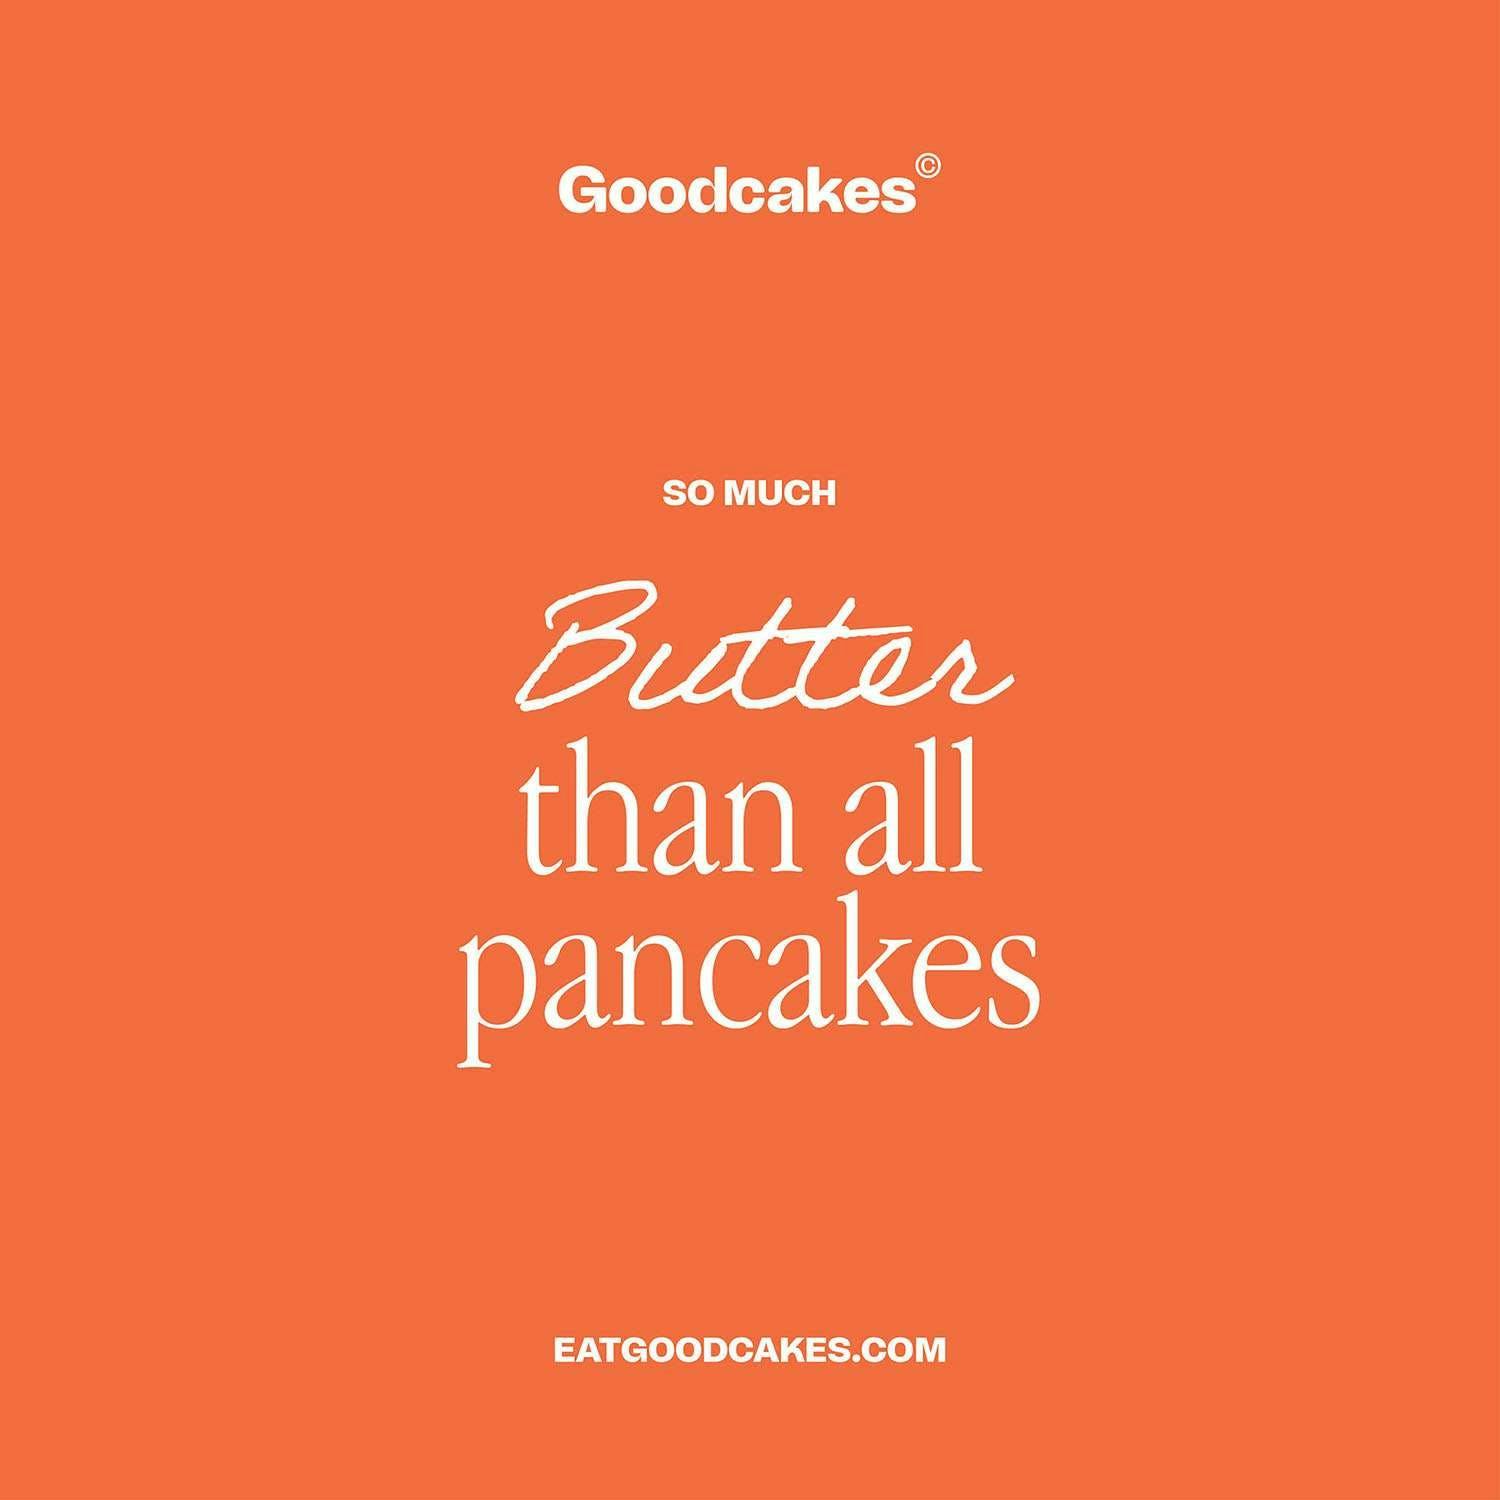 Goodcakes - Brand Identity, Packaging Design, 3D Rendering and Art Direction